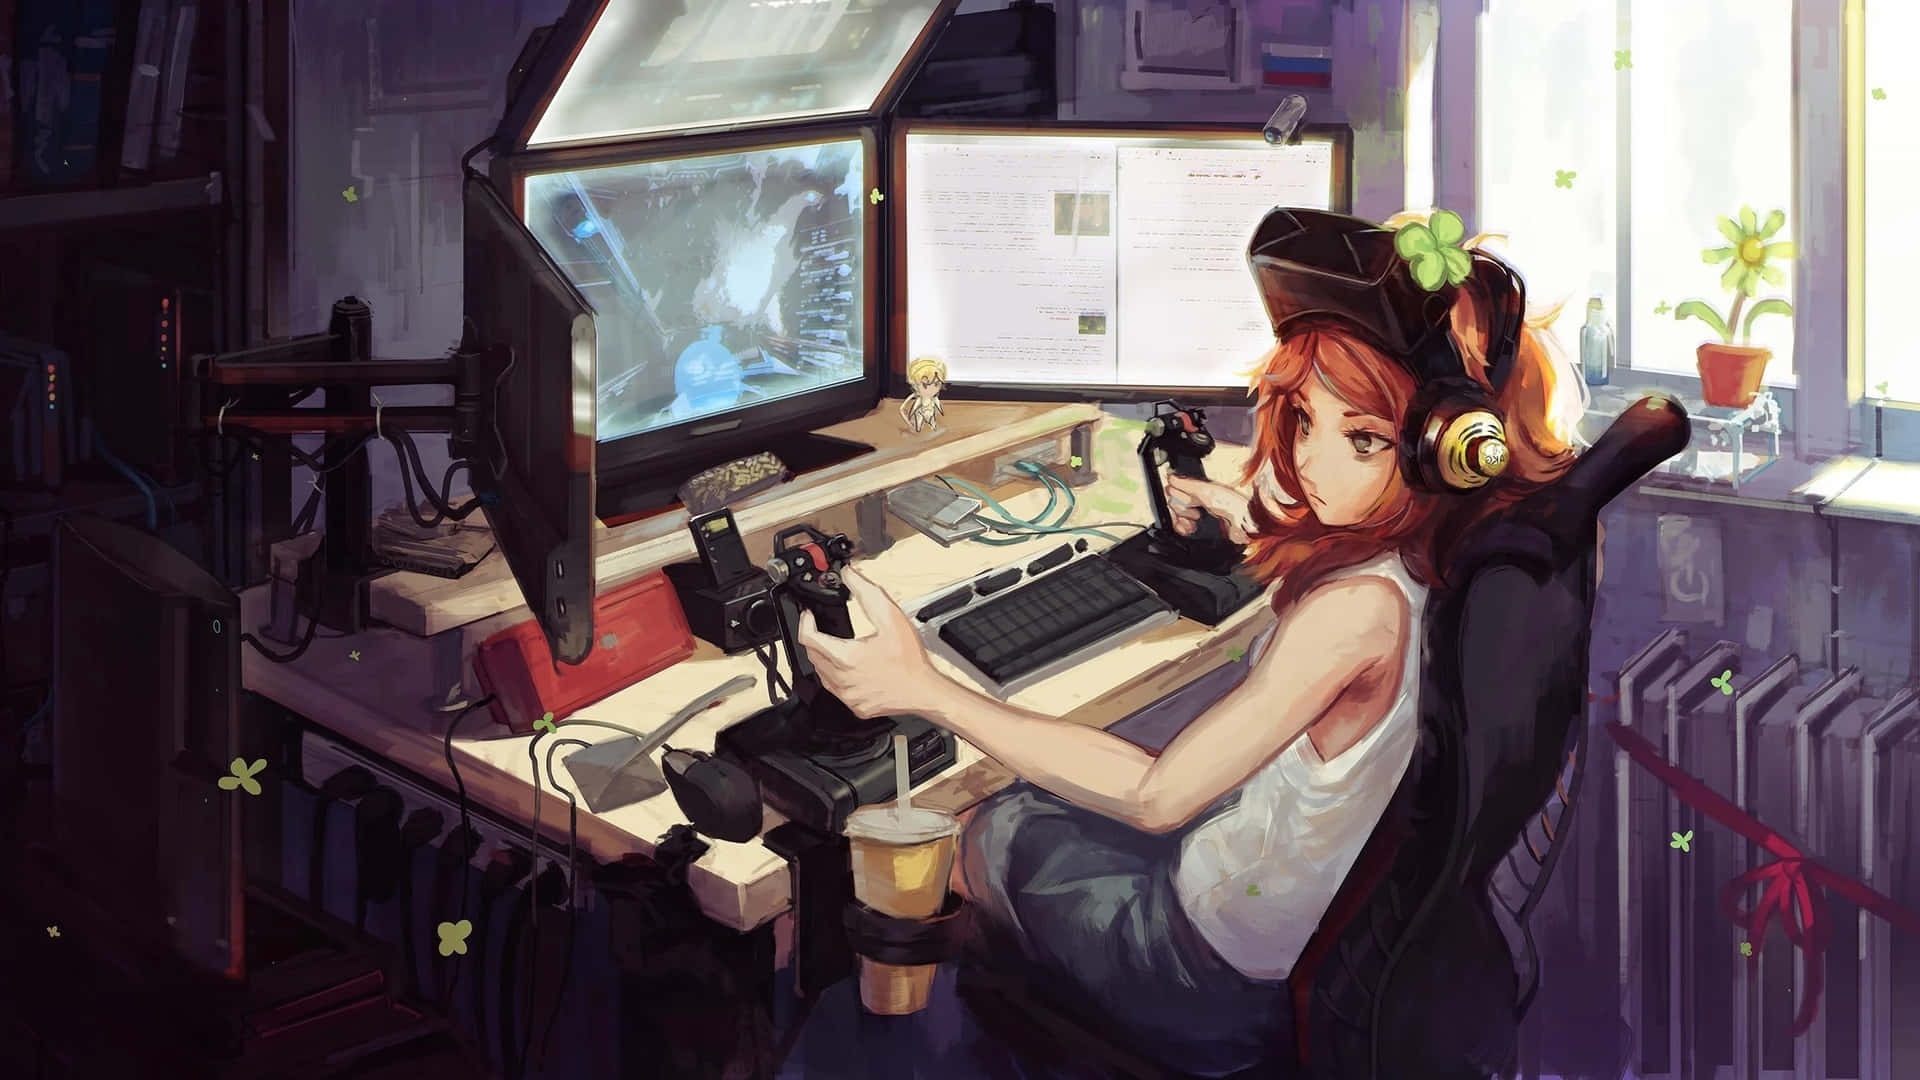 A Girl Sitting At A Desk With A Computer